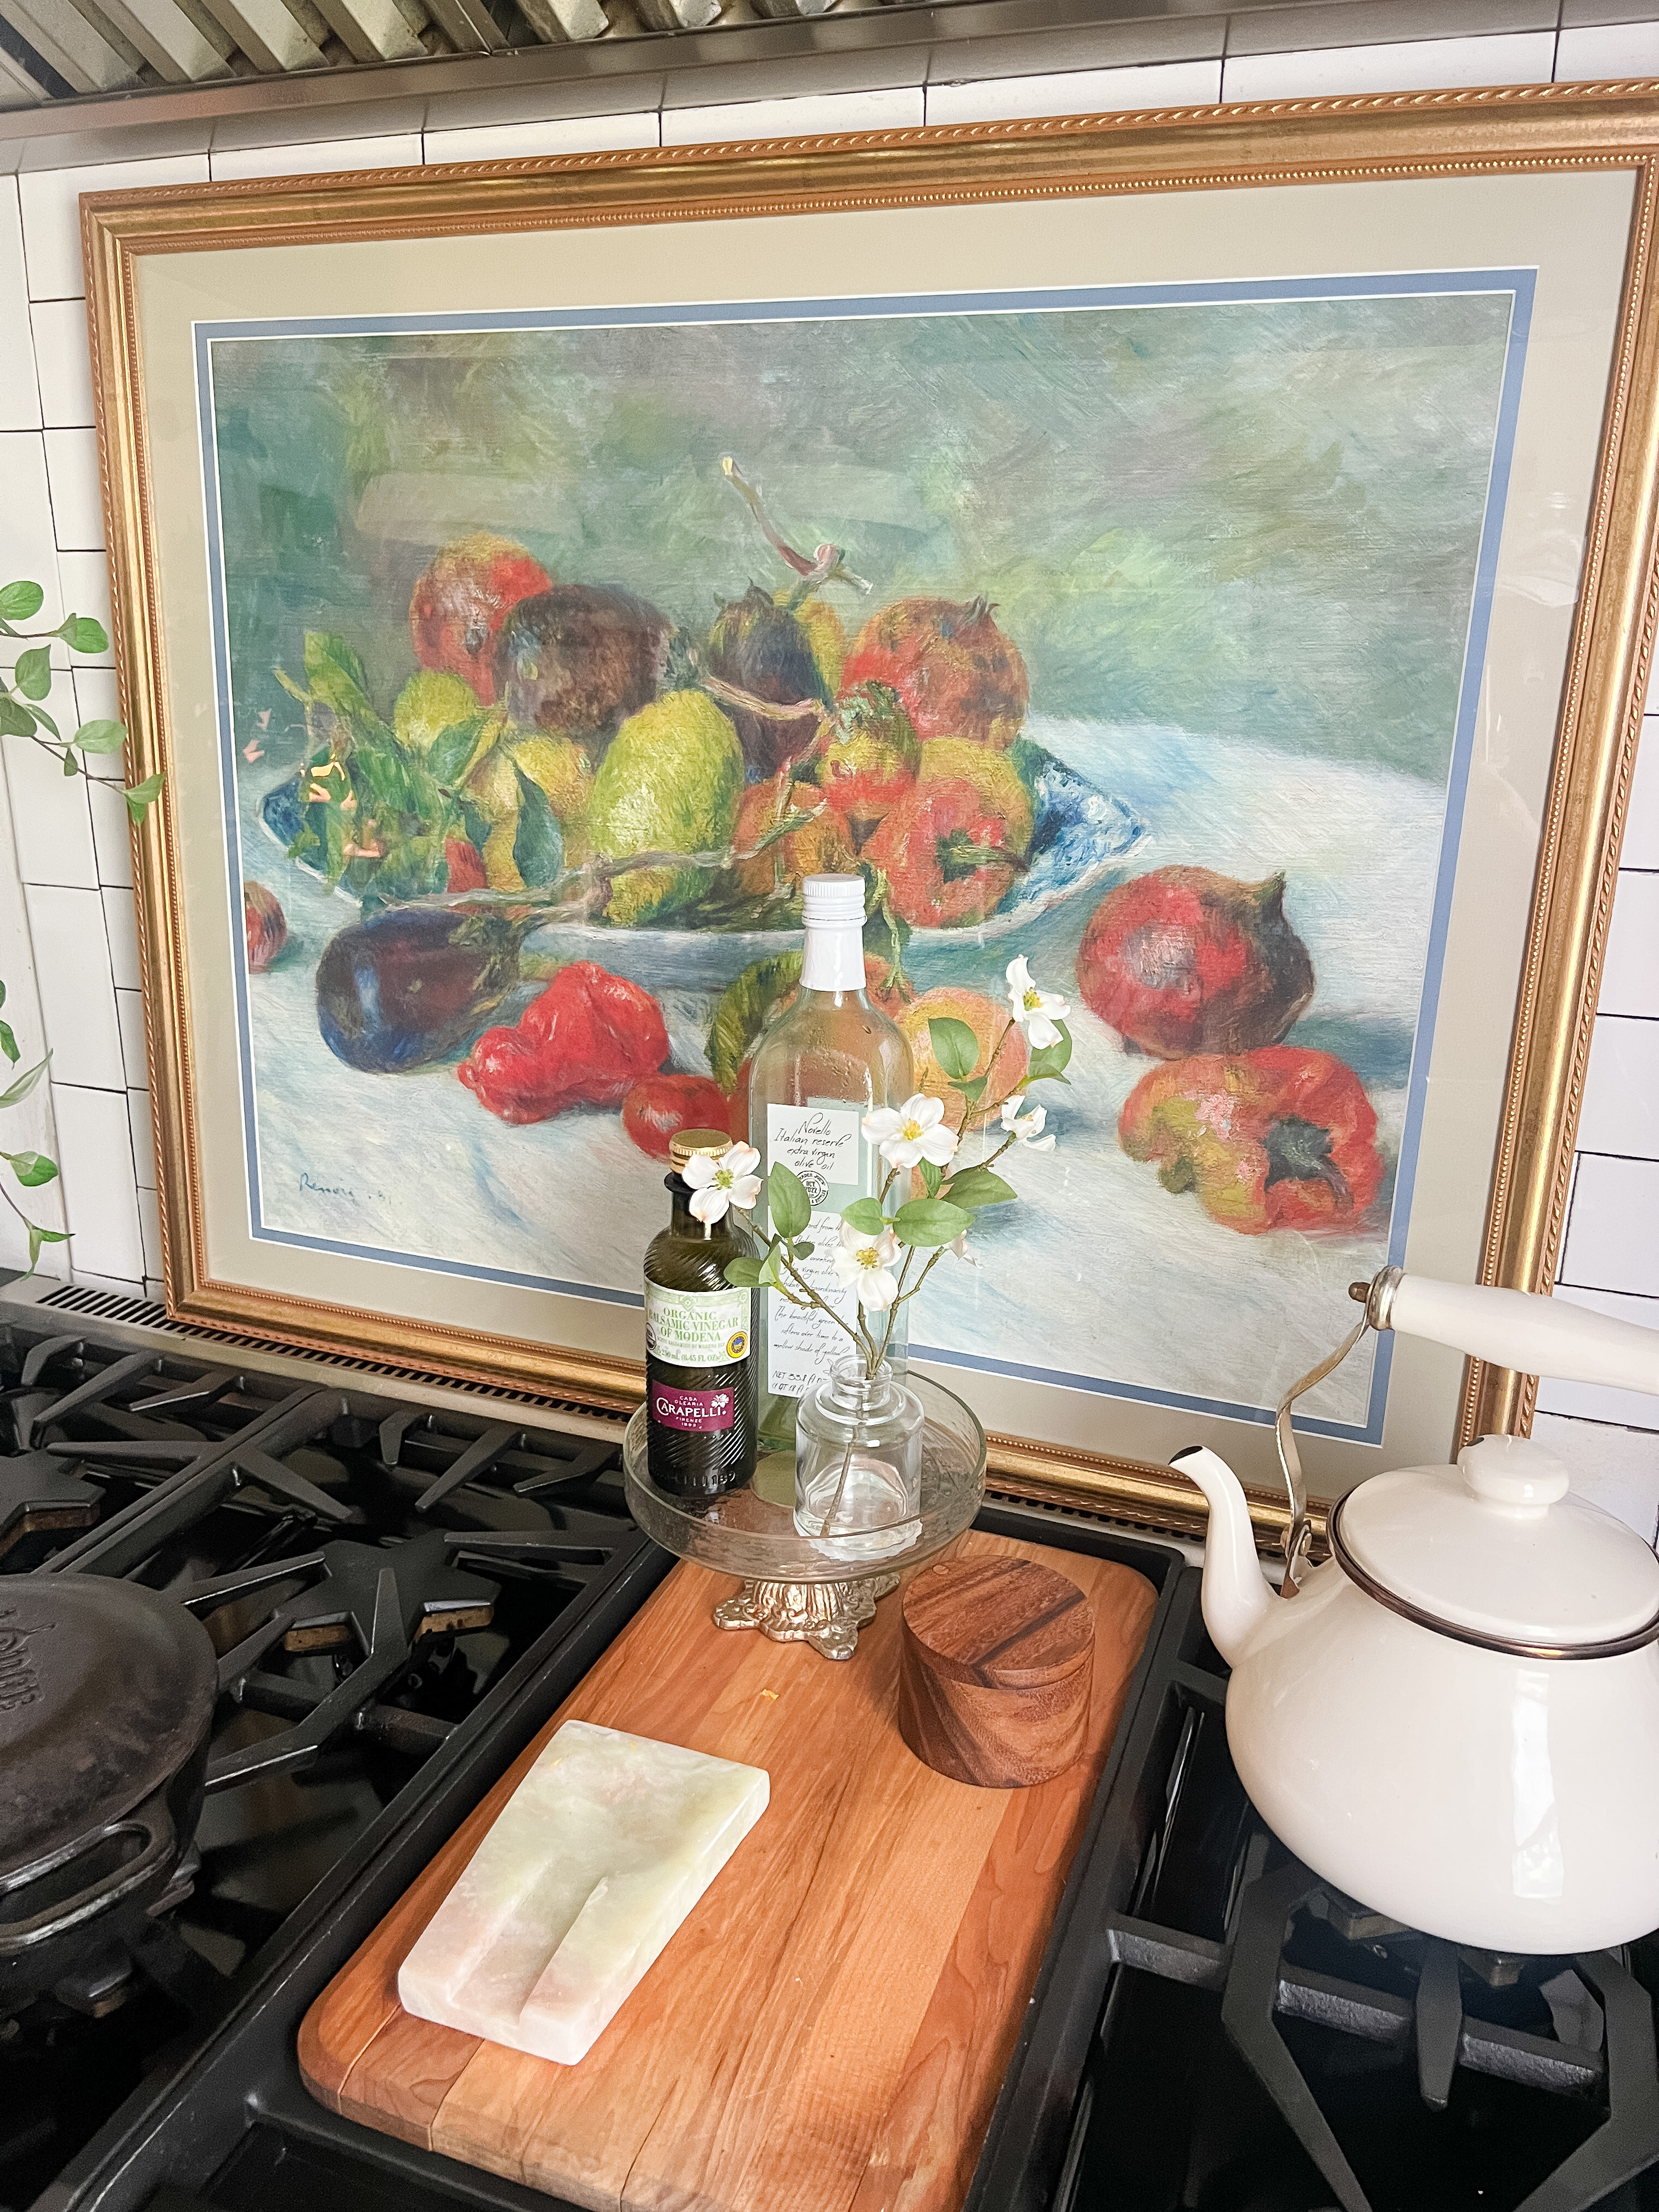 Mistakes That Hurt Your Art Business: A framed art print in a kitchen